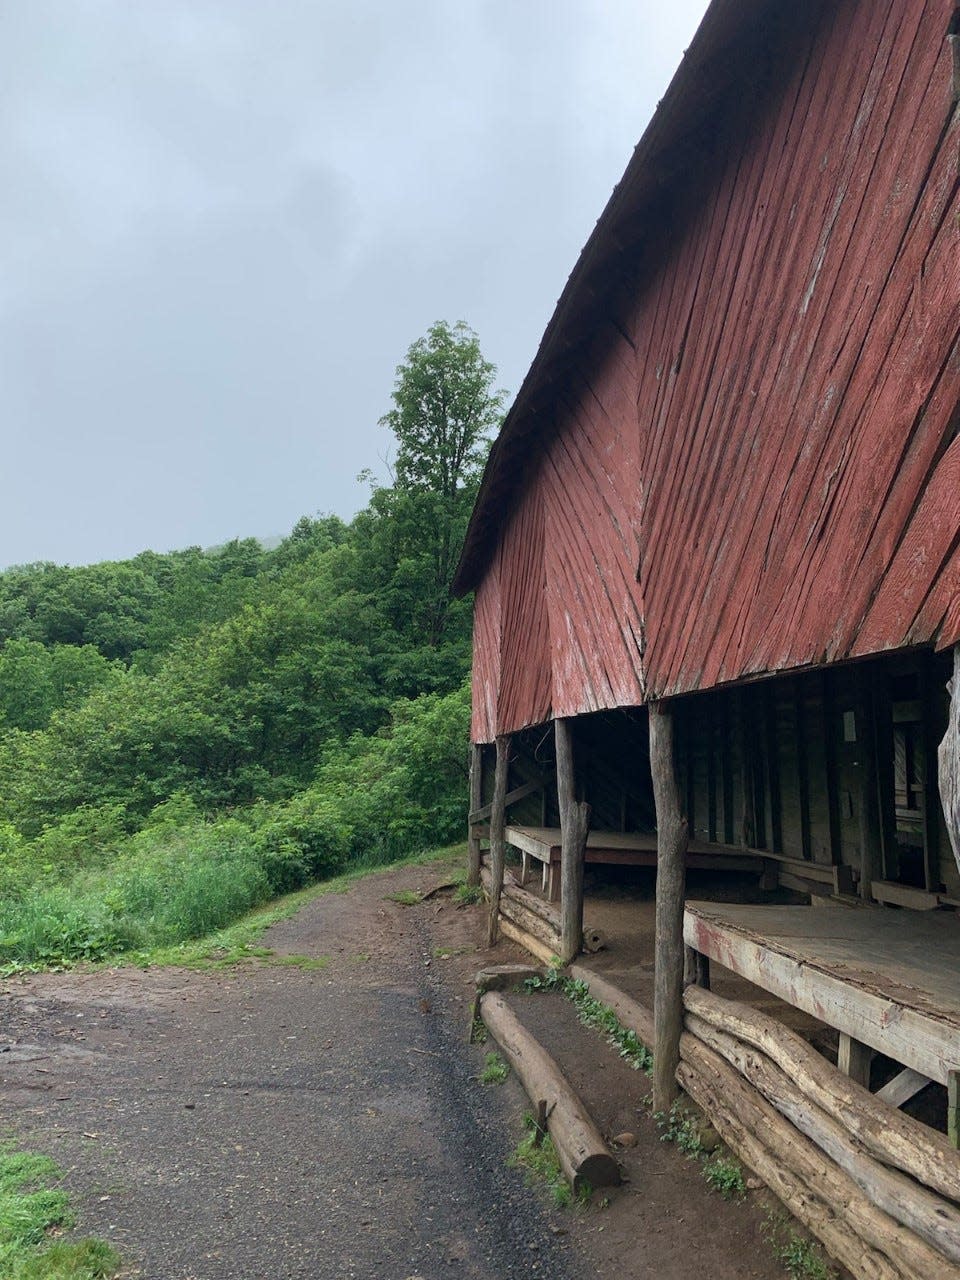 "The locust posts that support the shelter are well out of plumb, and are in many cases no longer well embedded into the ground into the swell around the shelter," said Caleb Davis, a U.S. Forest Service facilities engineer of Overmountain Shelter.